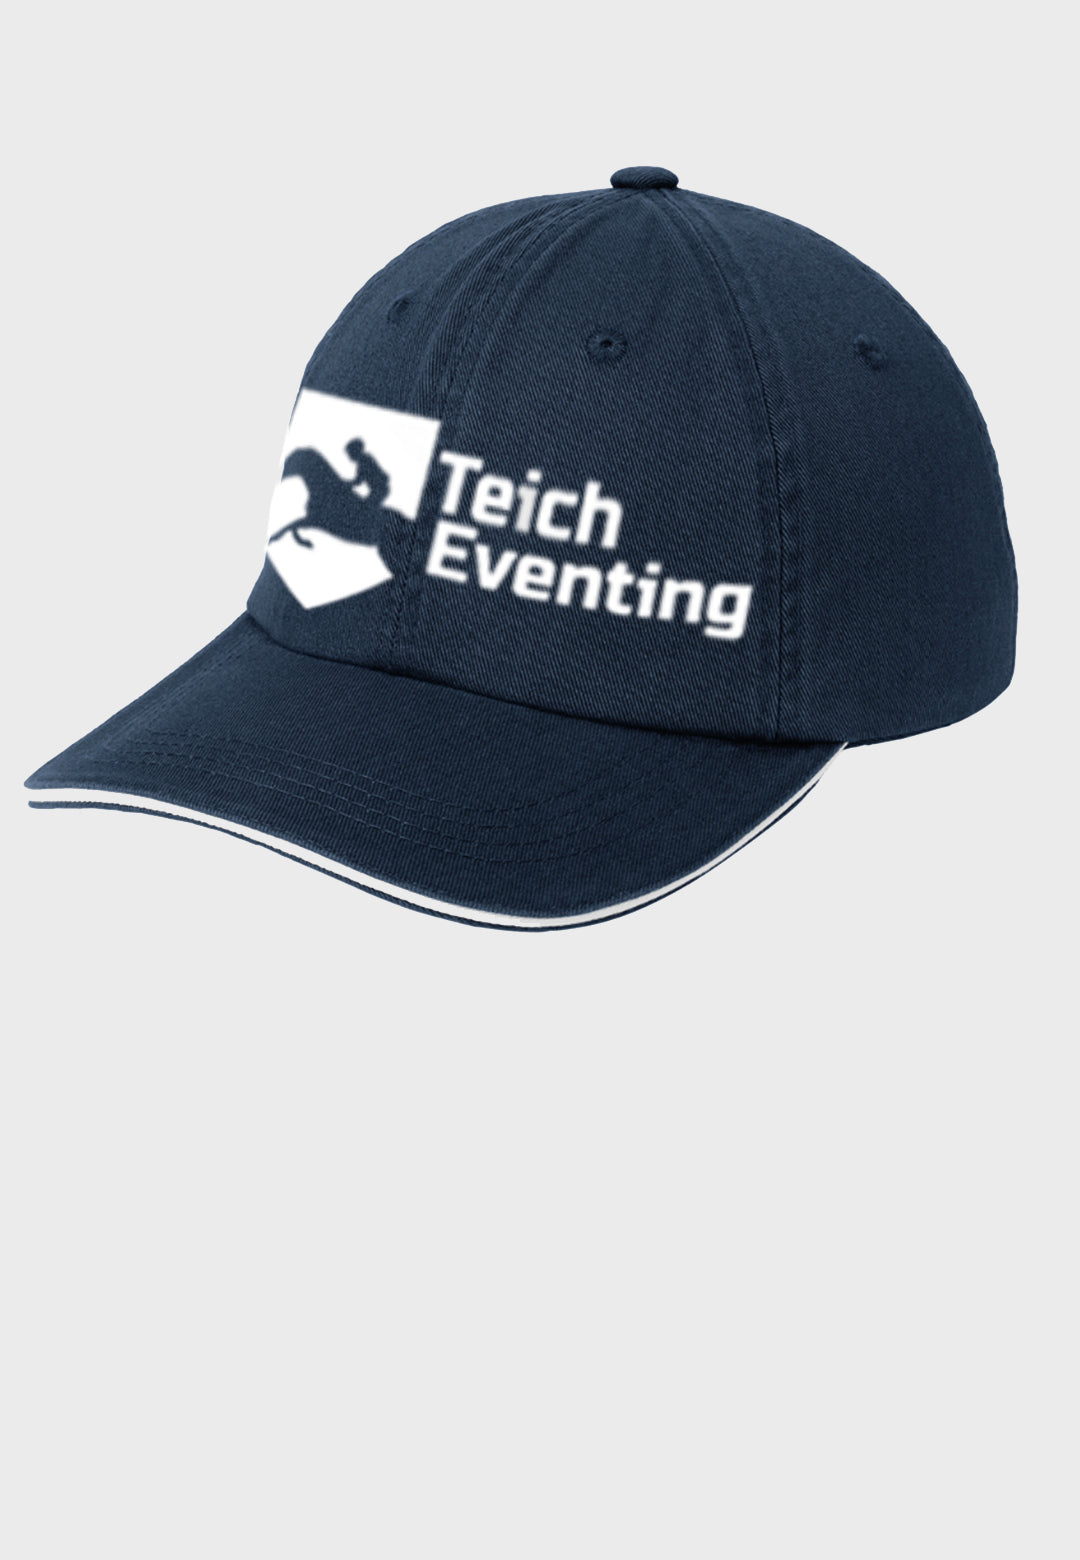 Teich Eventing Port Authority® Sandwich Bill Cap with Striped Closure